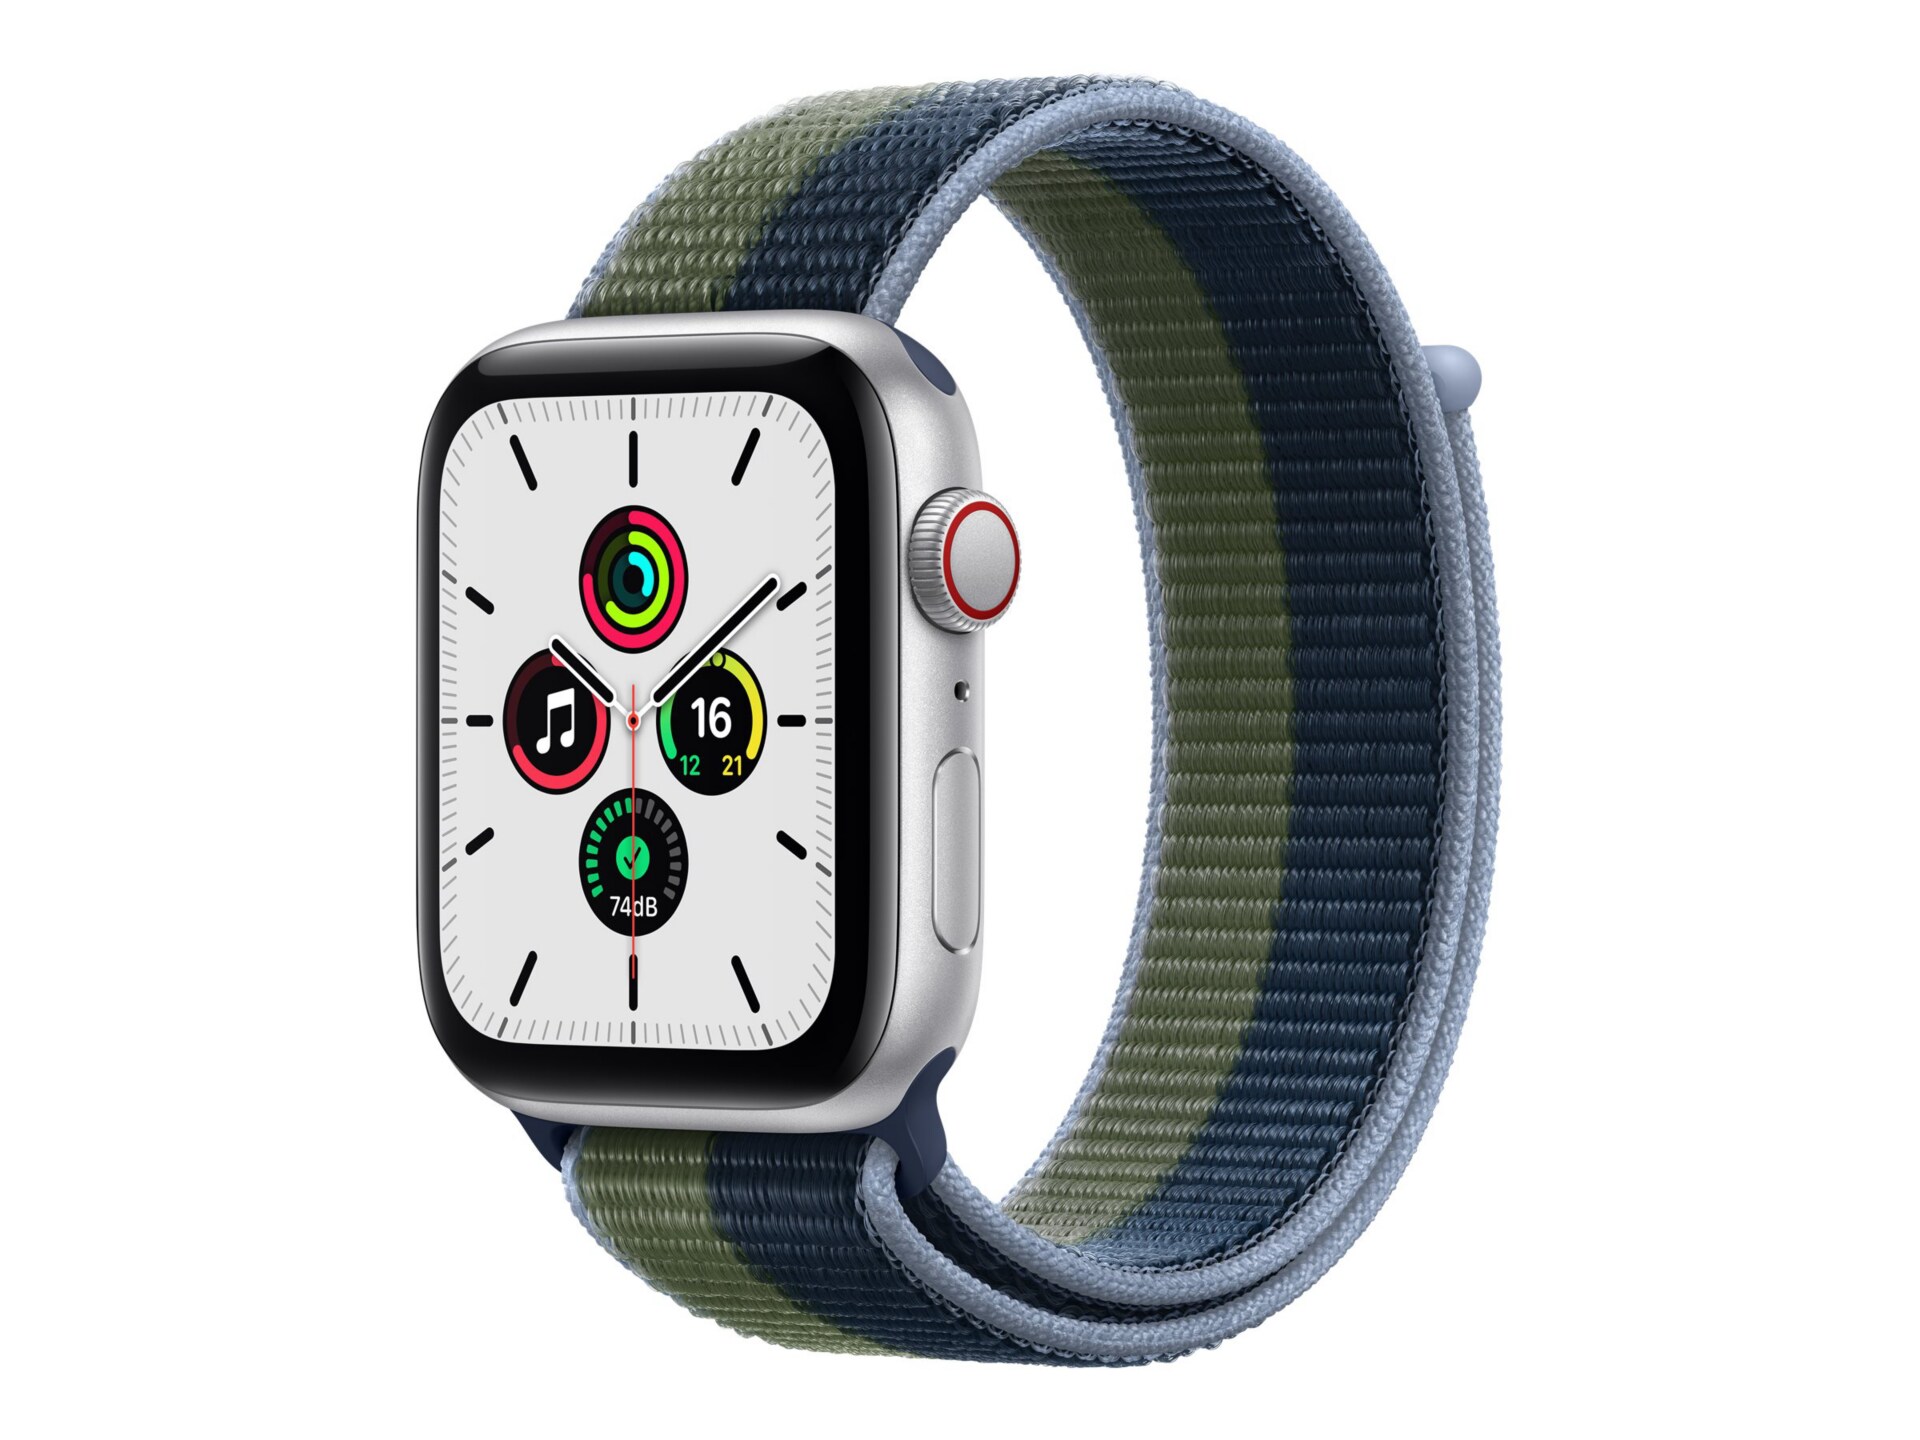 Apple Watch SE (GPS + Cellular) - silver aluminum - smart watch with sport loop - abyss blue/moss green - 32 GB